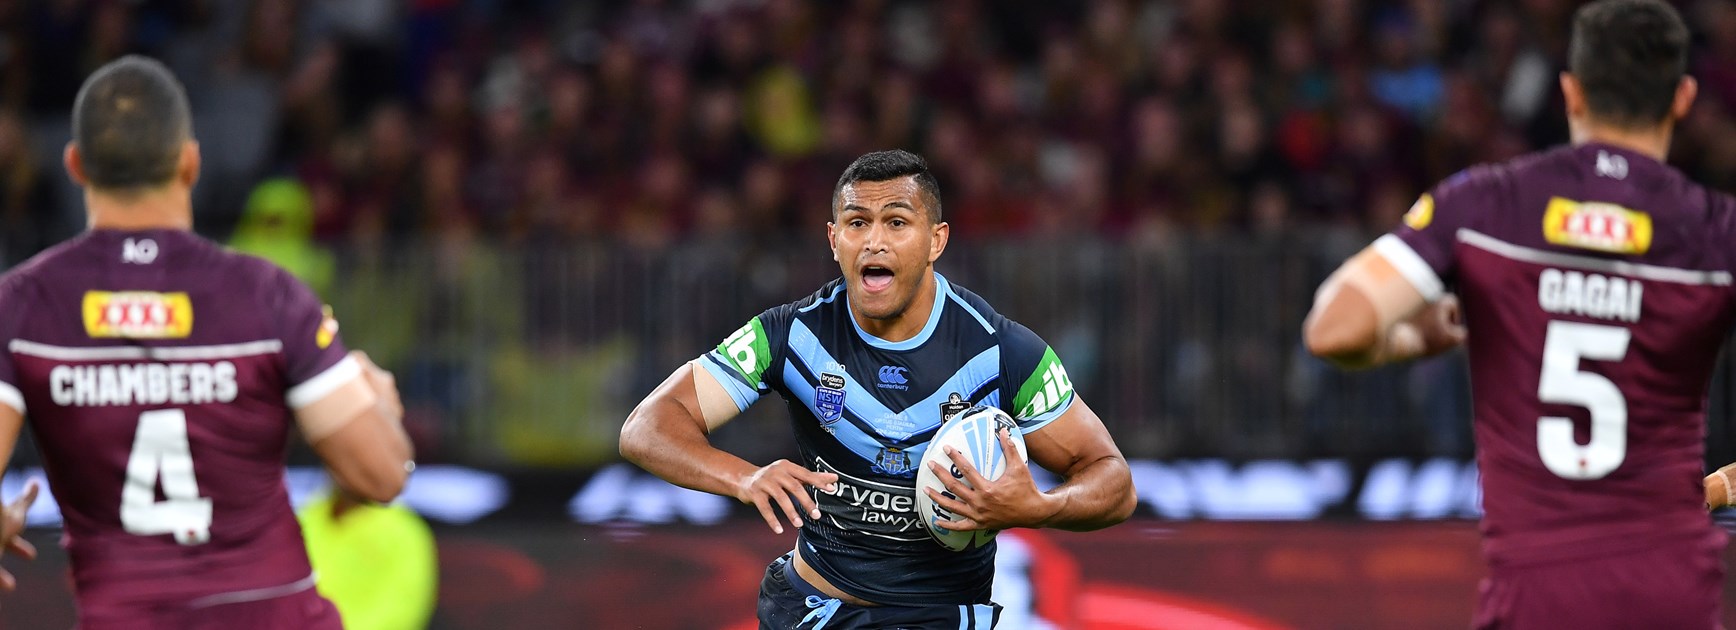 Knights secure NSW prop Saifiti on two-year extension